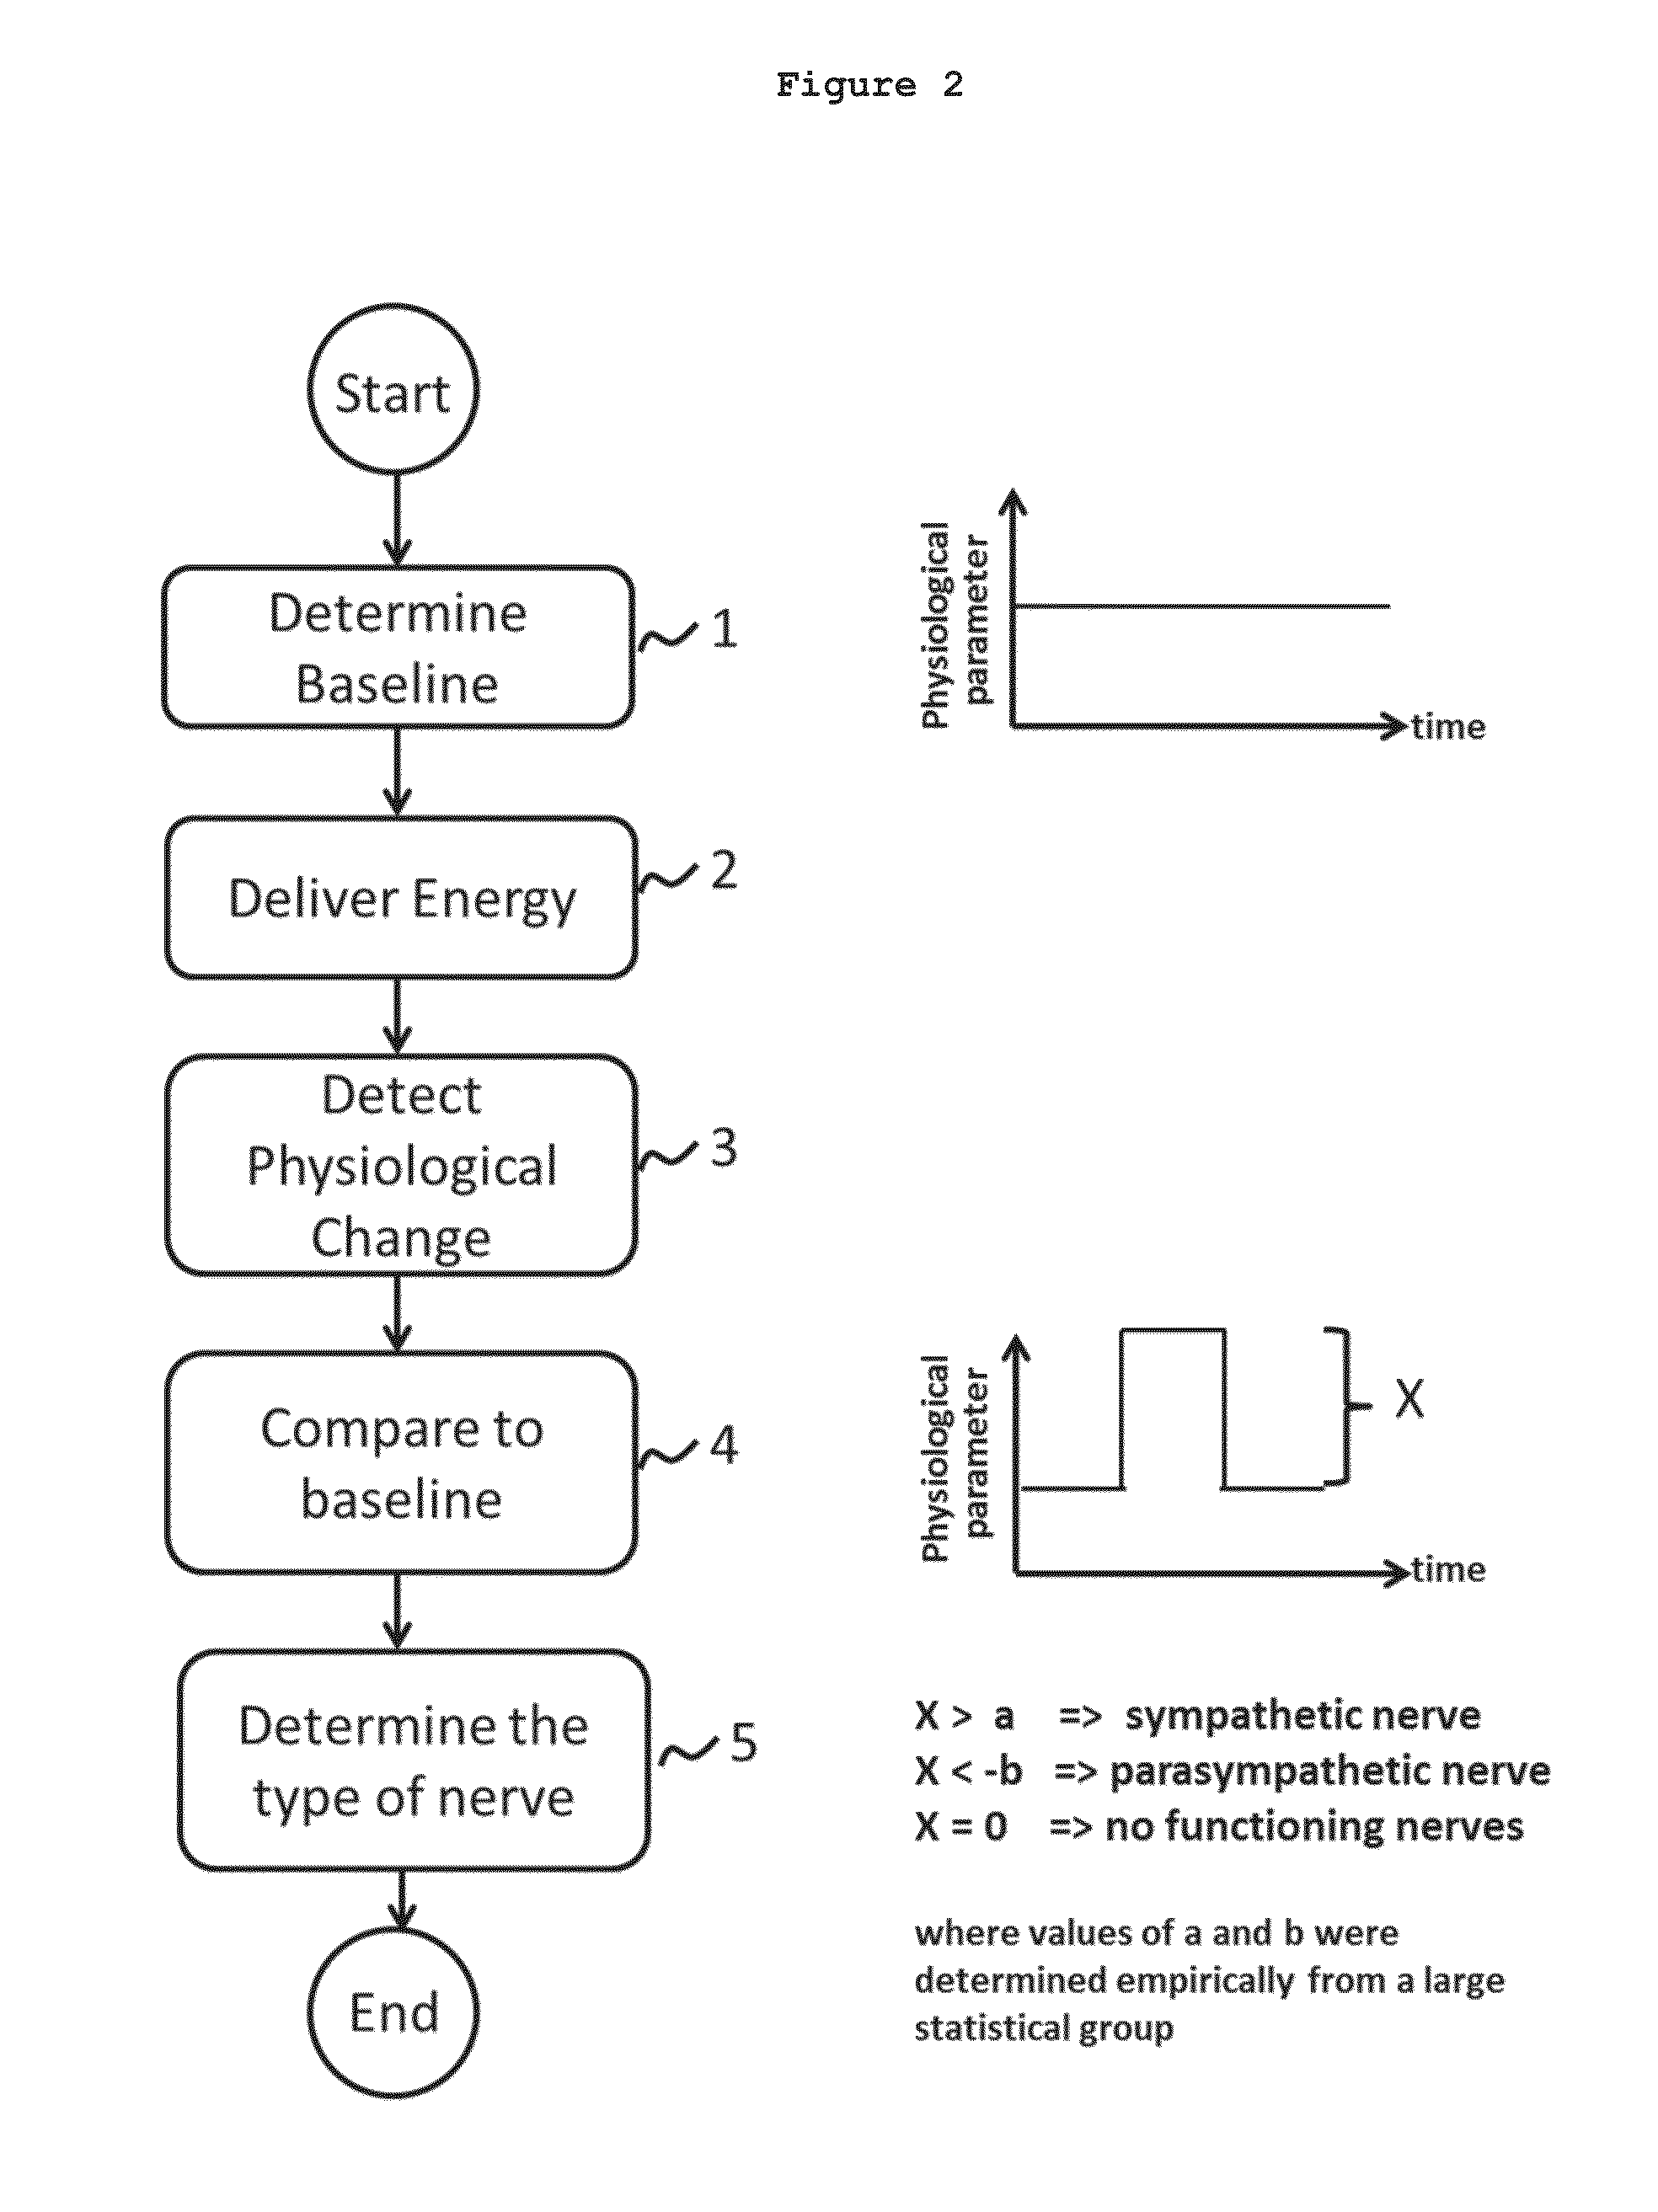 System and method for locating and identifying the functional nerves innervating the wall of arteries